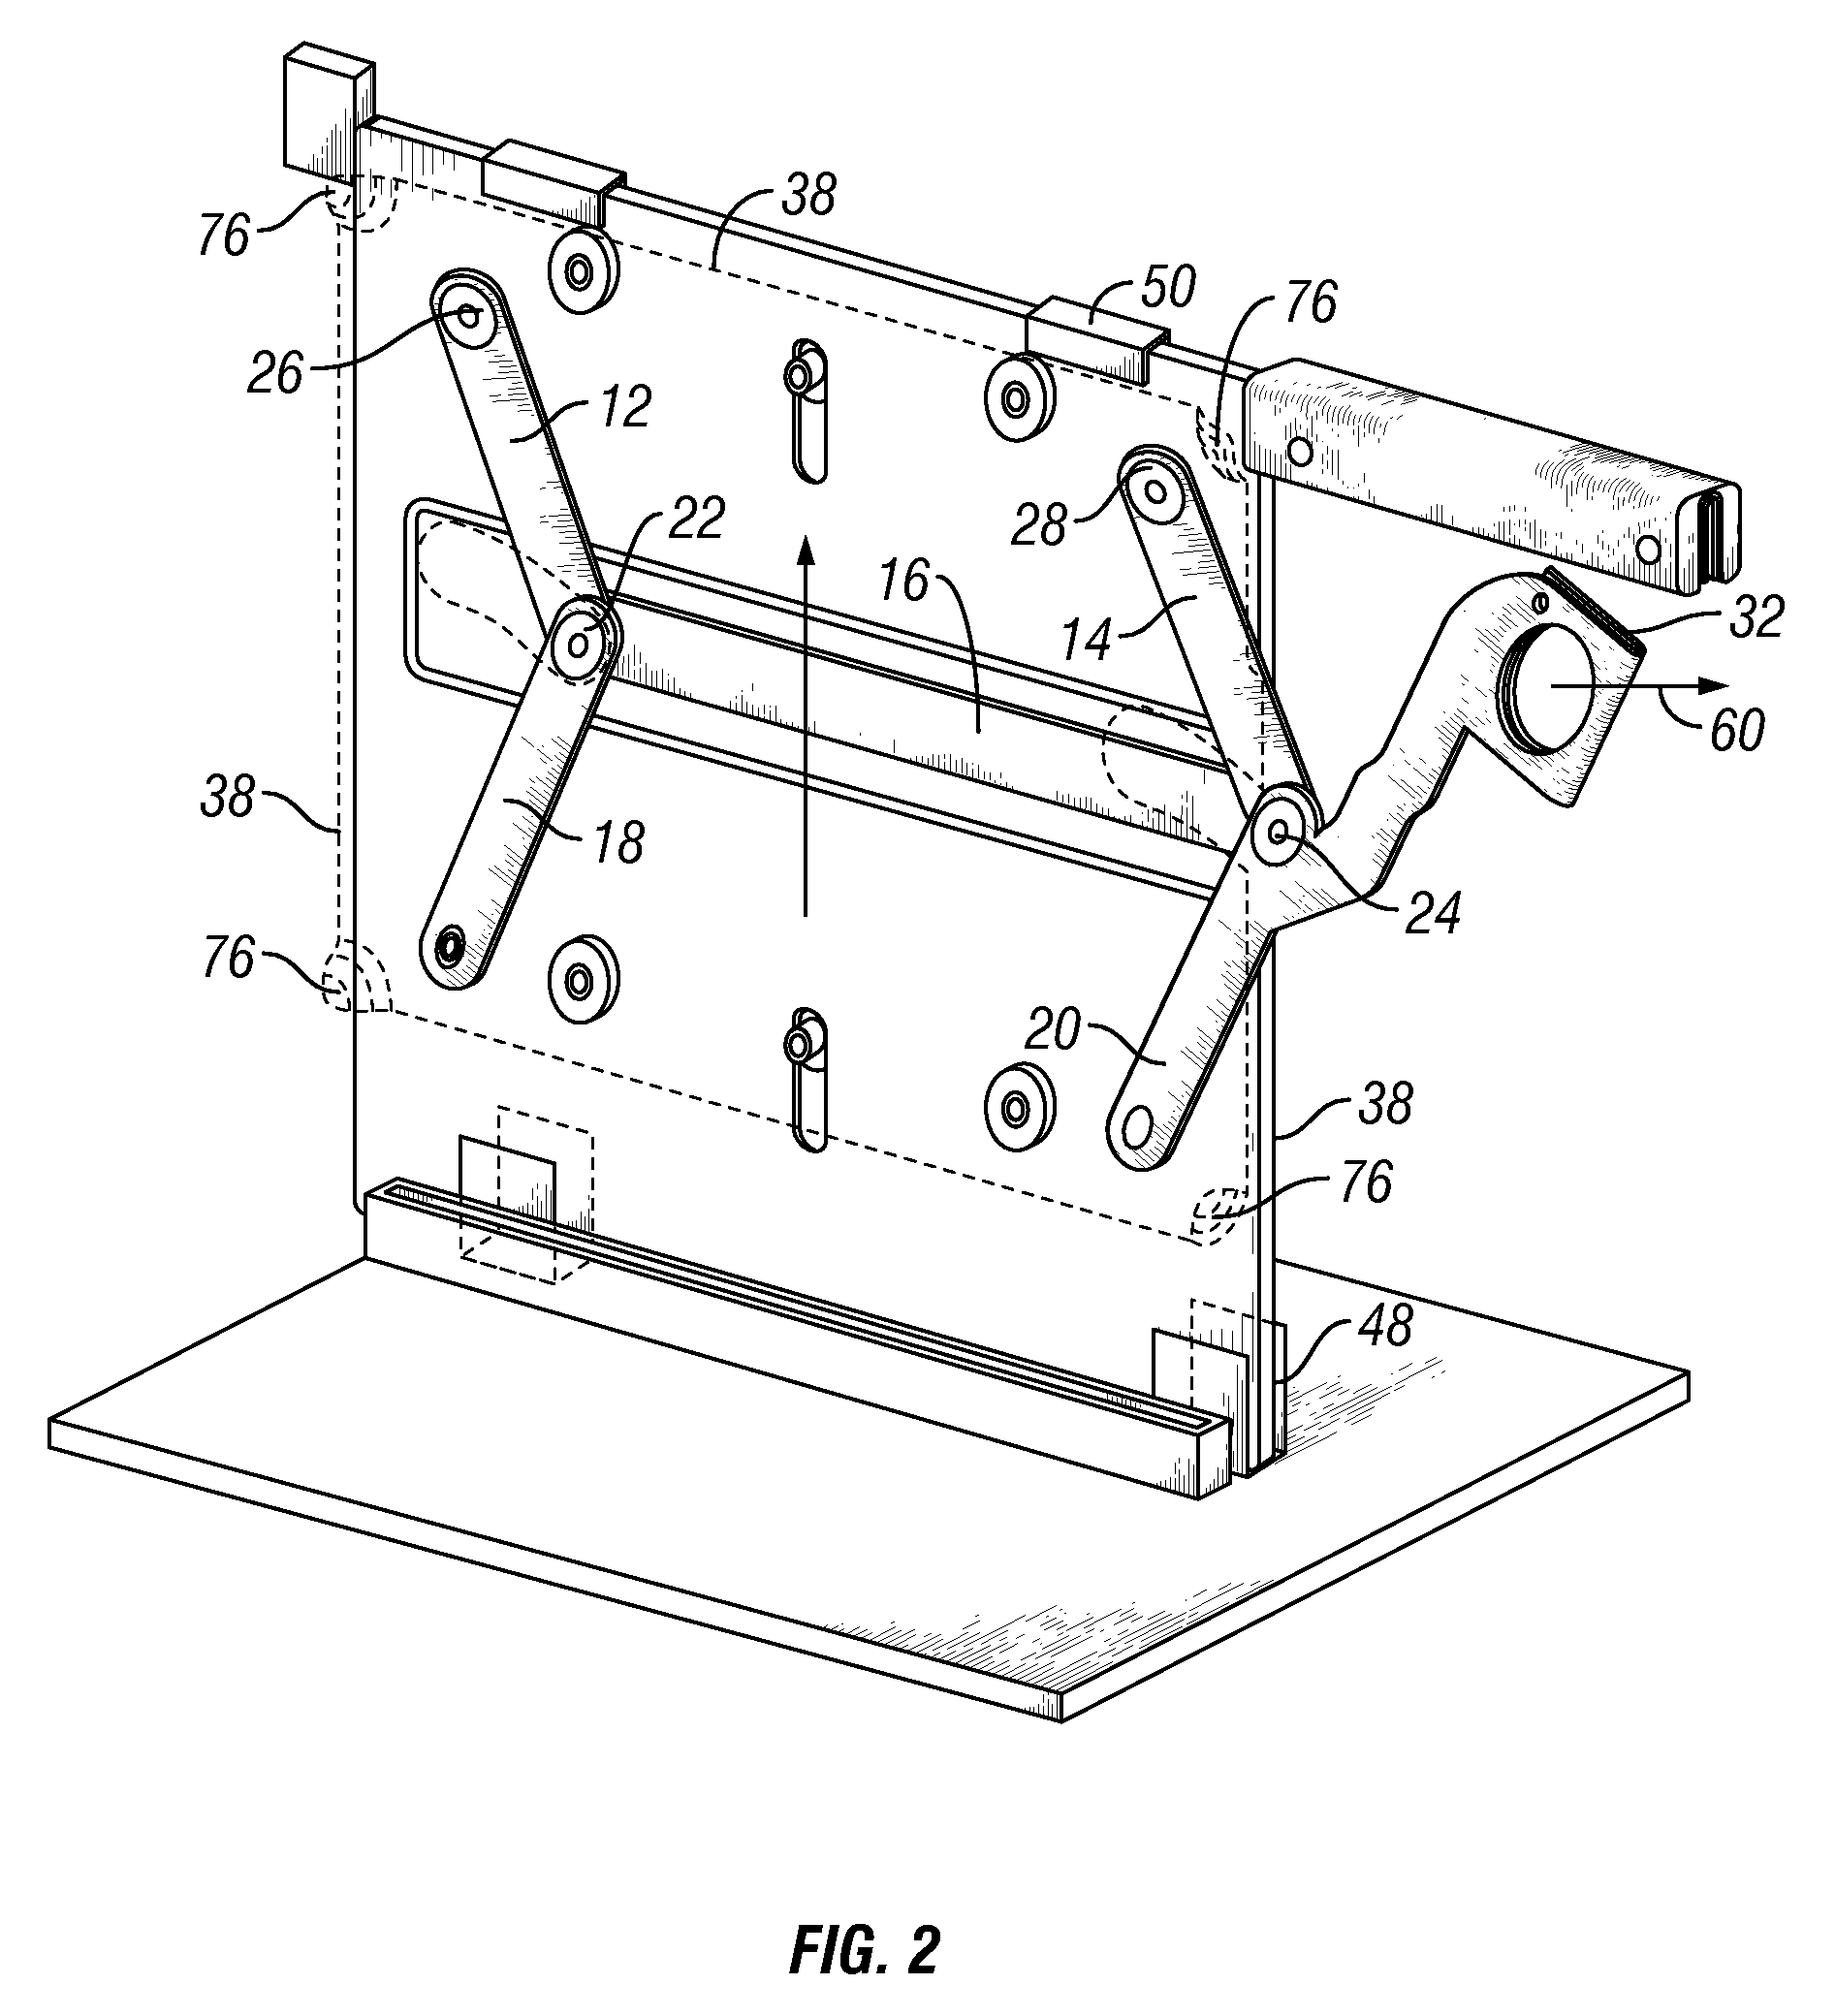 Apparatus for docking a printed circuit board